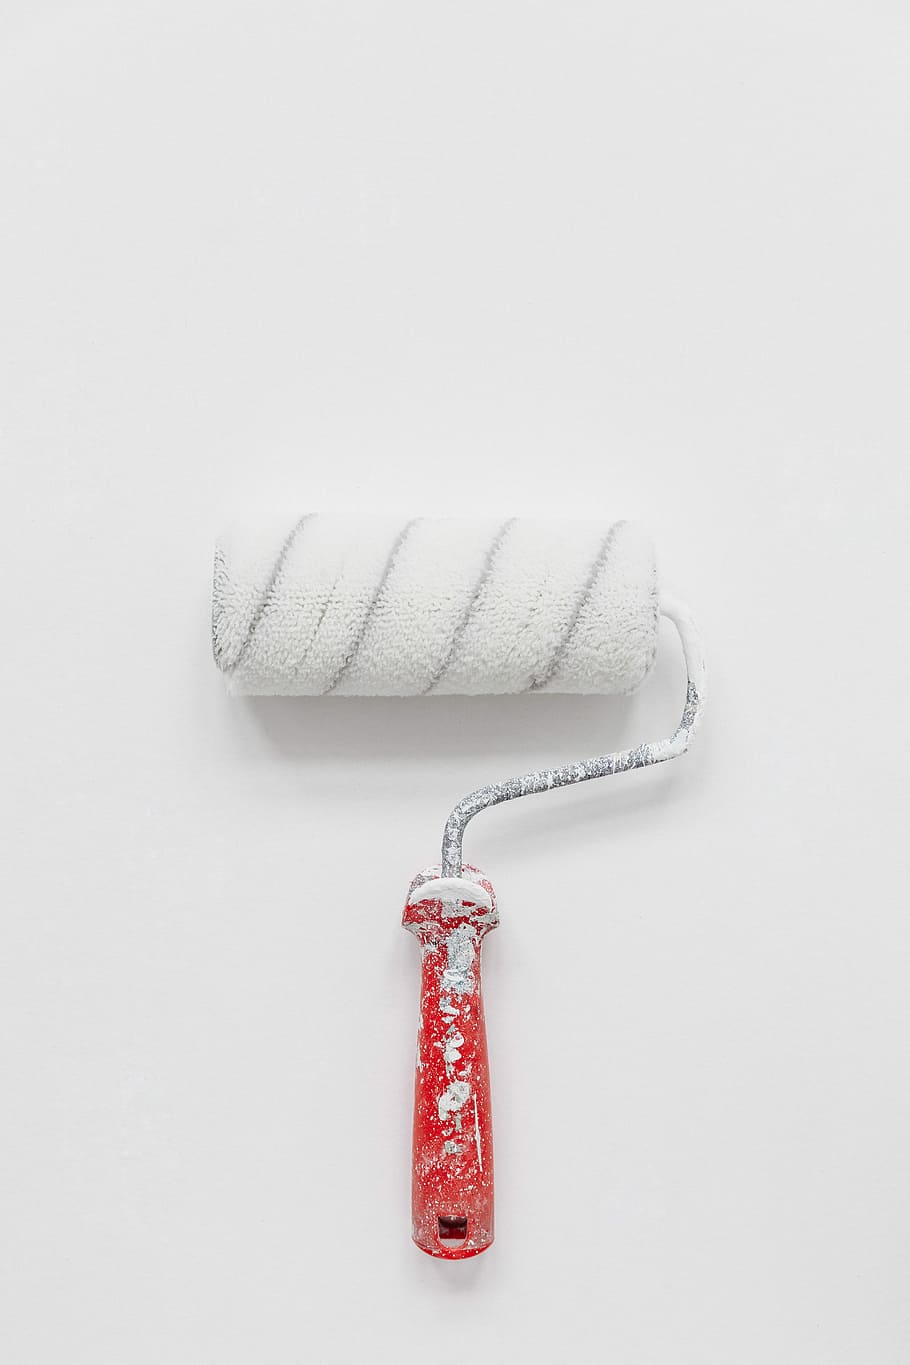 white paint roller, white and red paint roller, paintbrush, paint brush